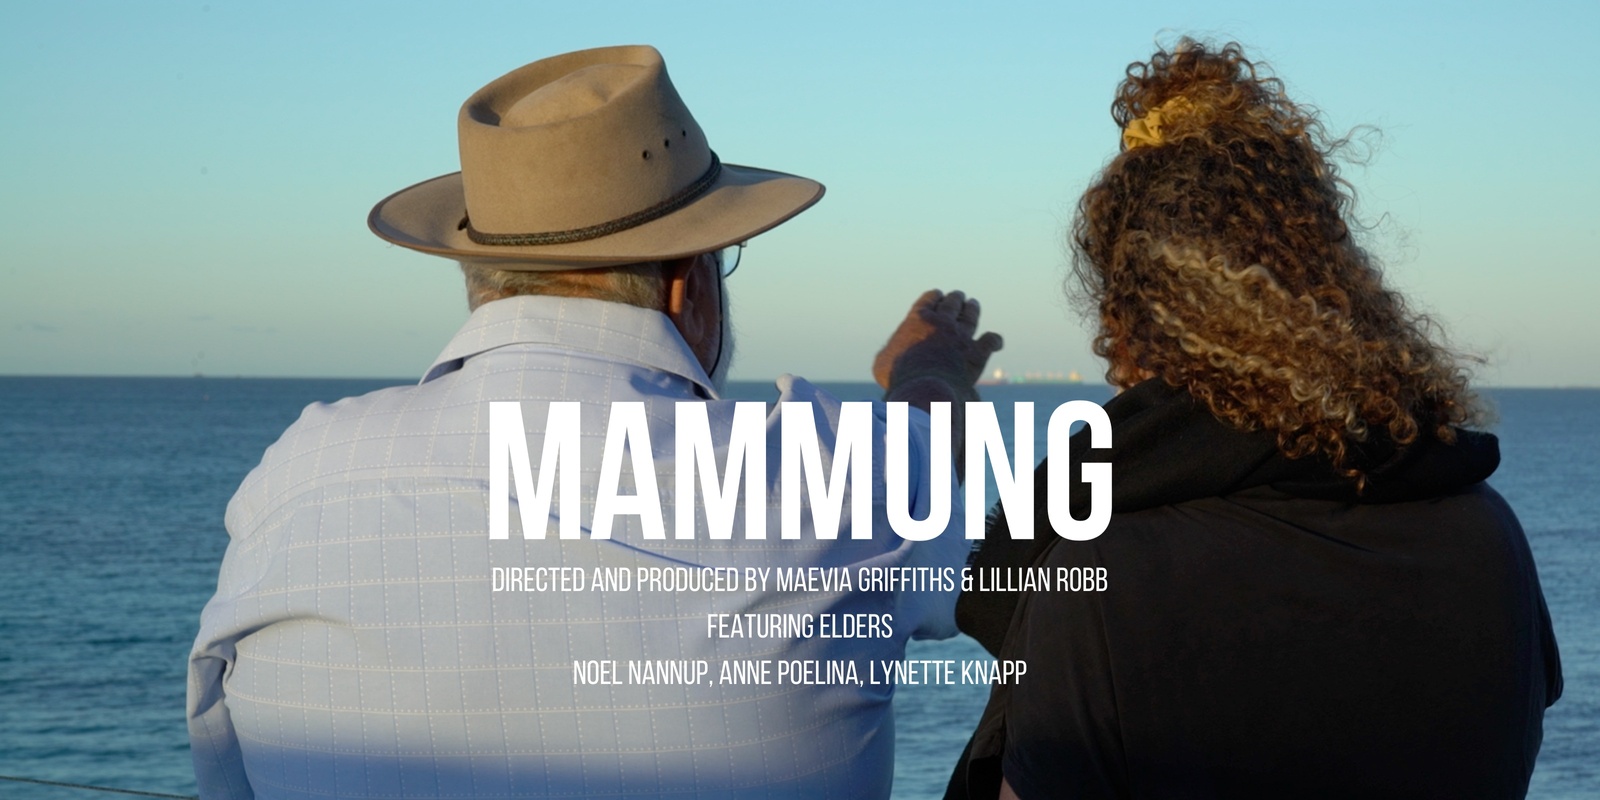 Banner image for MAMMUNG the film - screening & Q&A